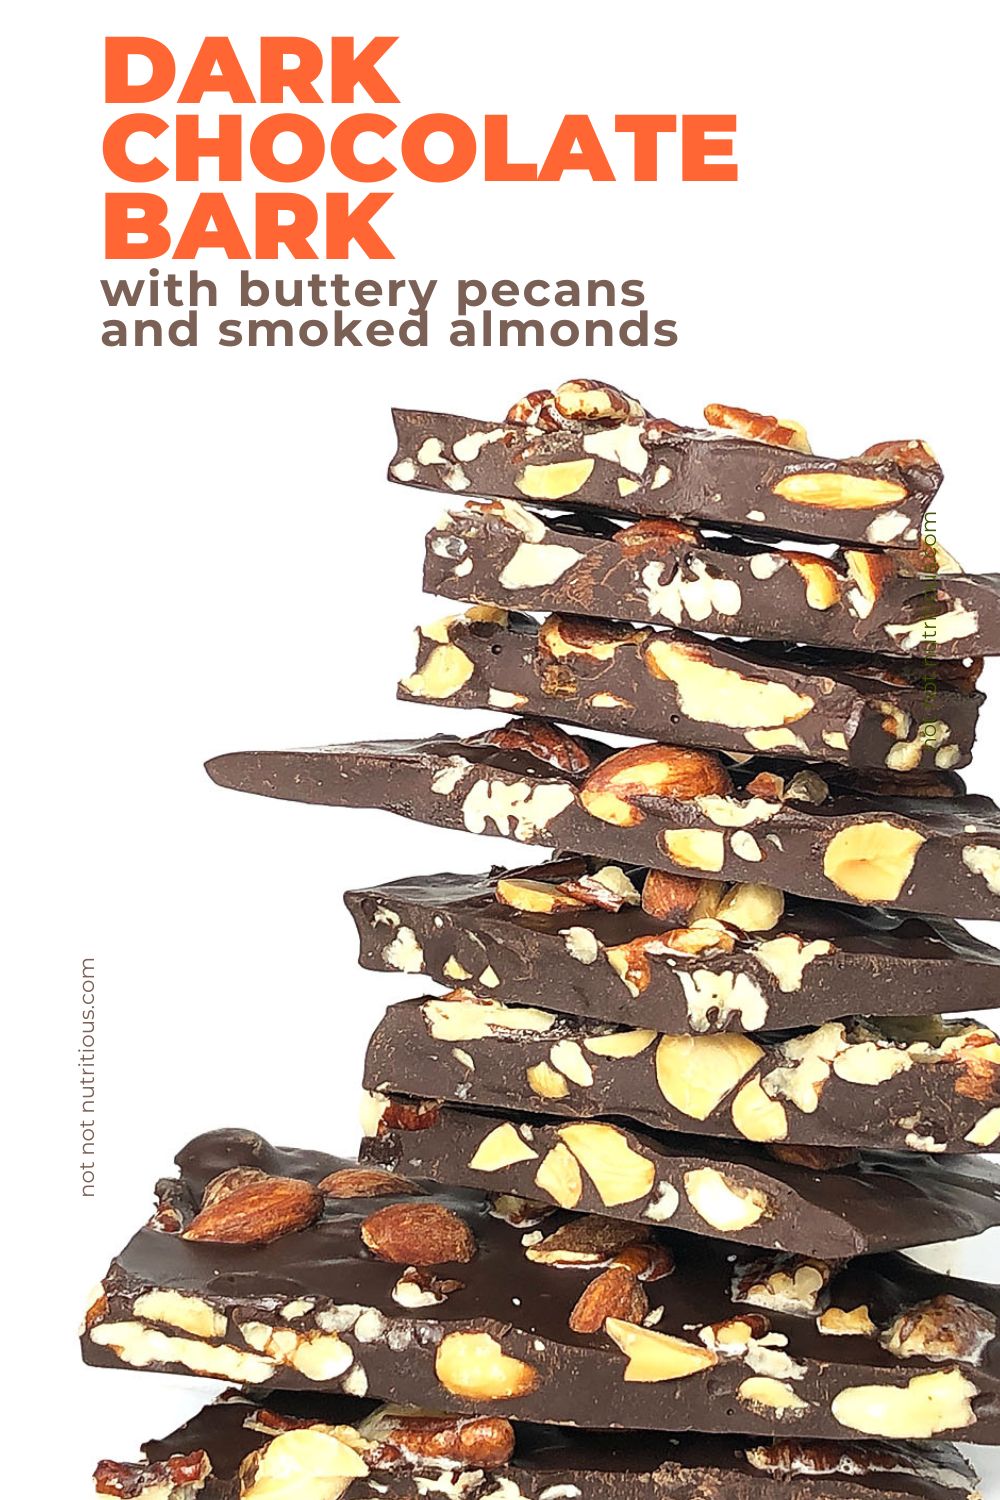 Pin for Dark Chocolate Bark with buttery pecans and smoked almonds, with a stack of bark against a white background